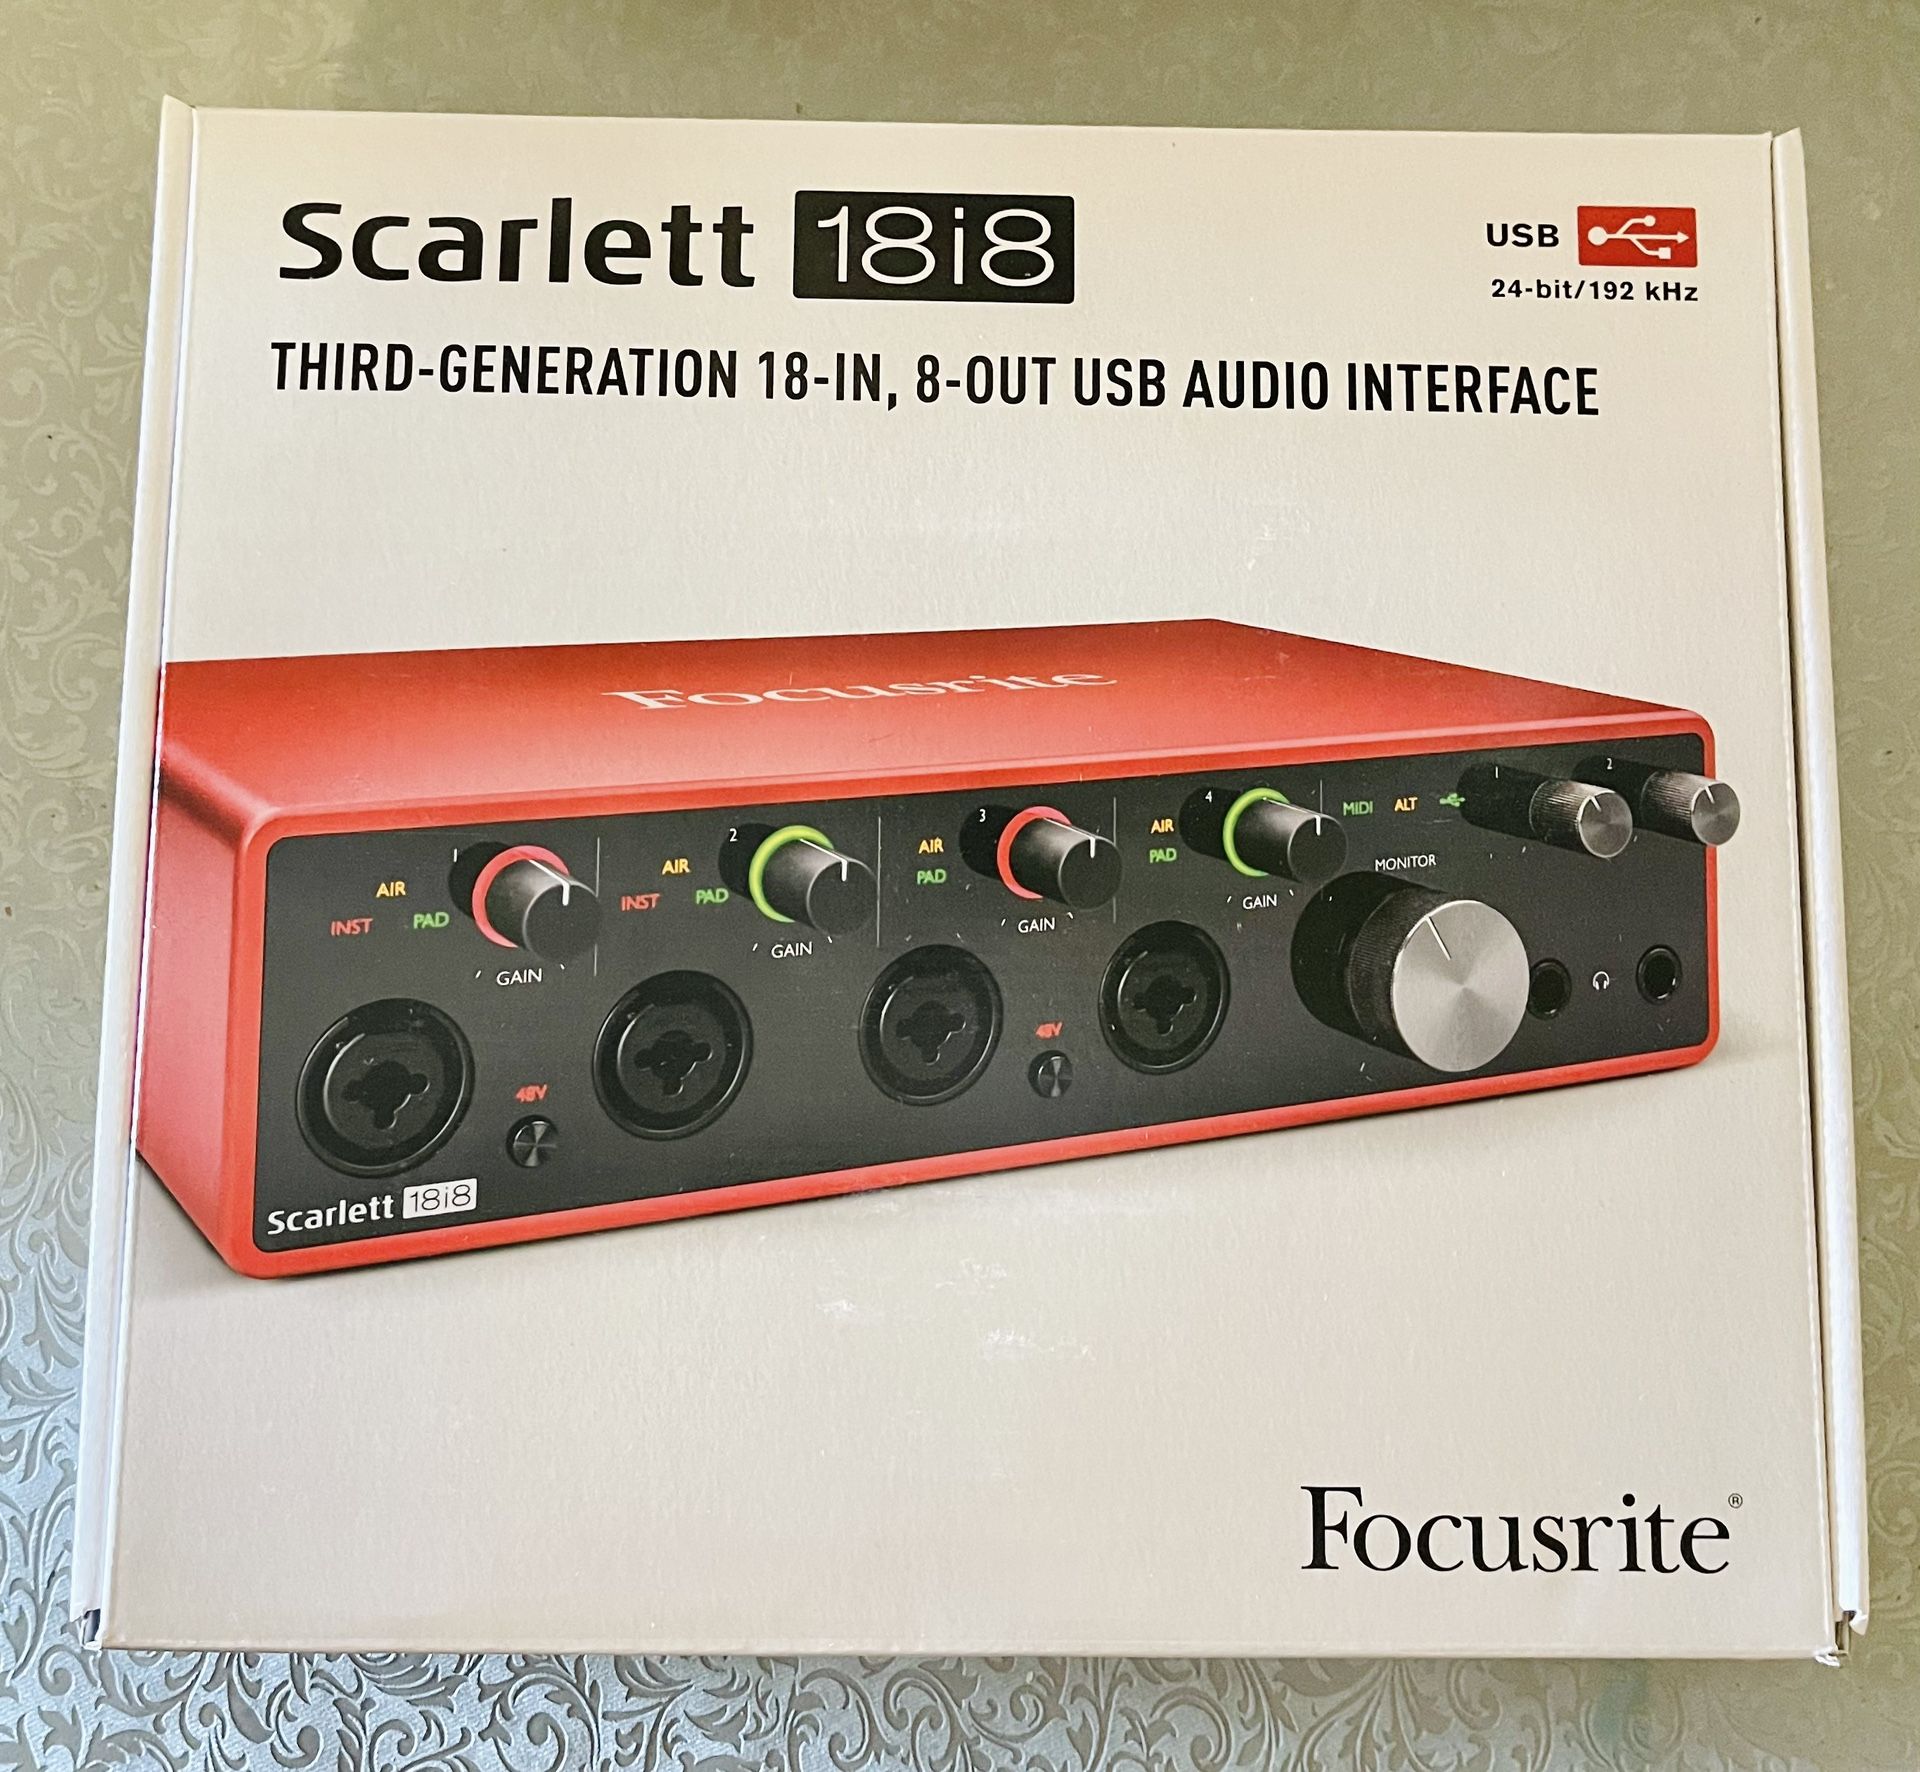 Focusrite Scarlett 18i8 3rd Gen USB Audio Interface, for Producers, Musicians, Bands, Content Creators — High-Fidelity, Studio Quality Recording, and 